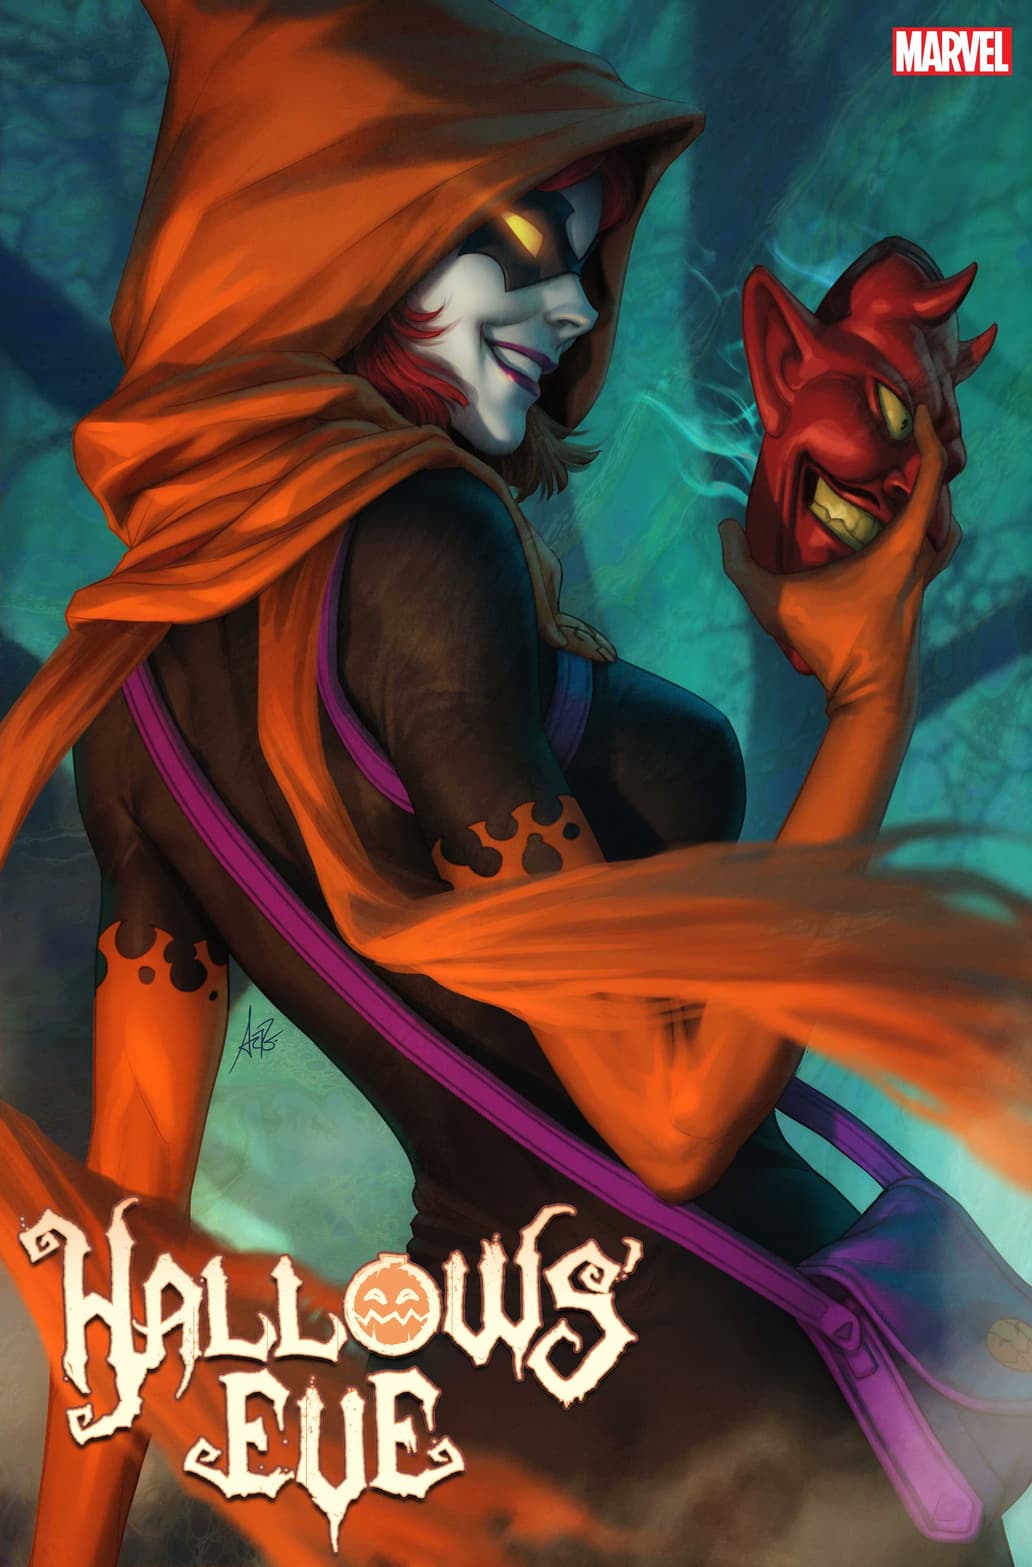 HALLOWS' EVE #1 variant cover by Stanley 'Artgerm' Lau